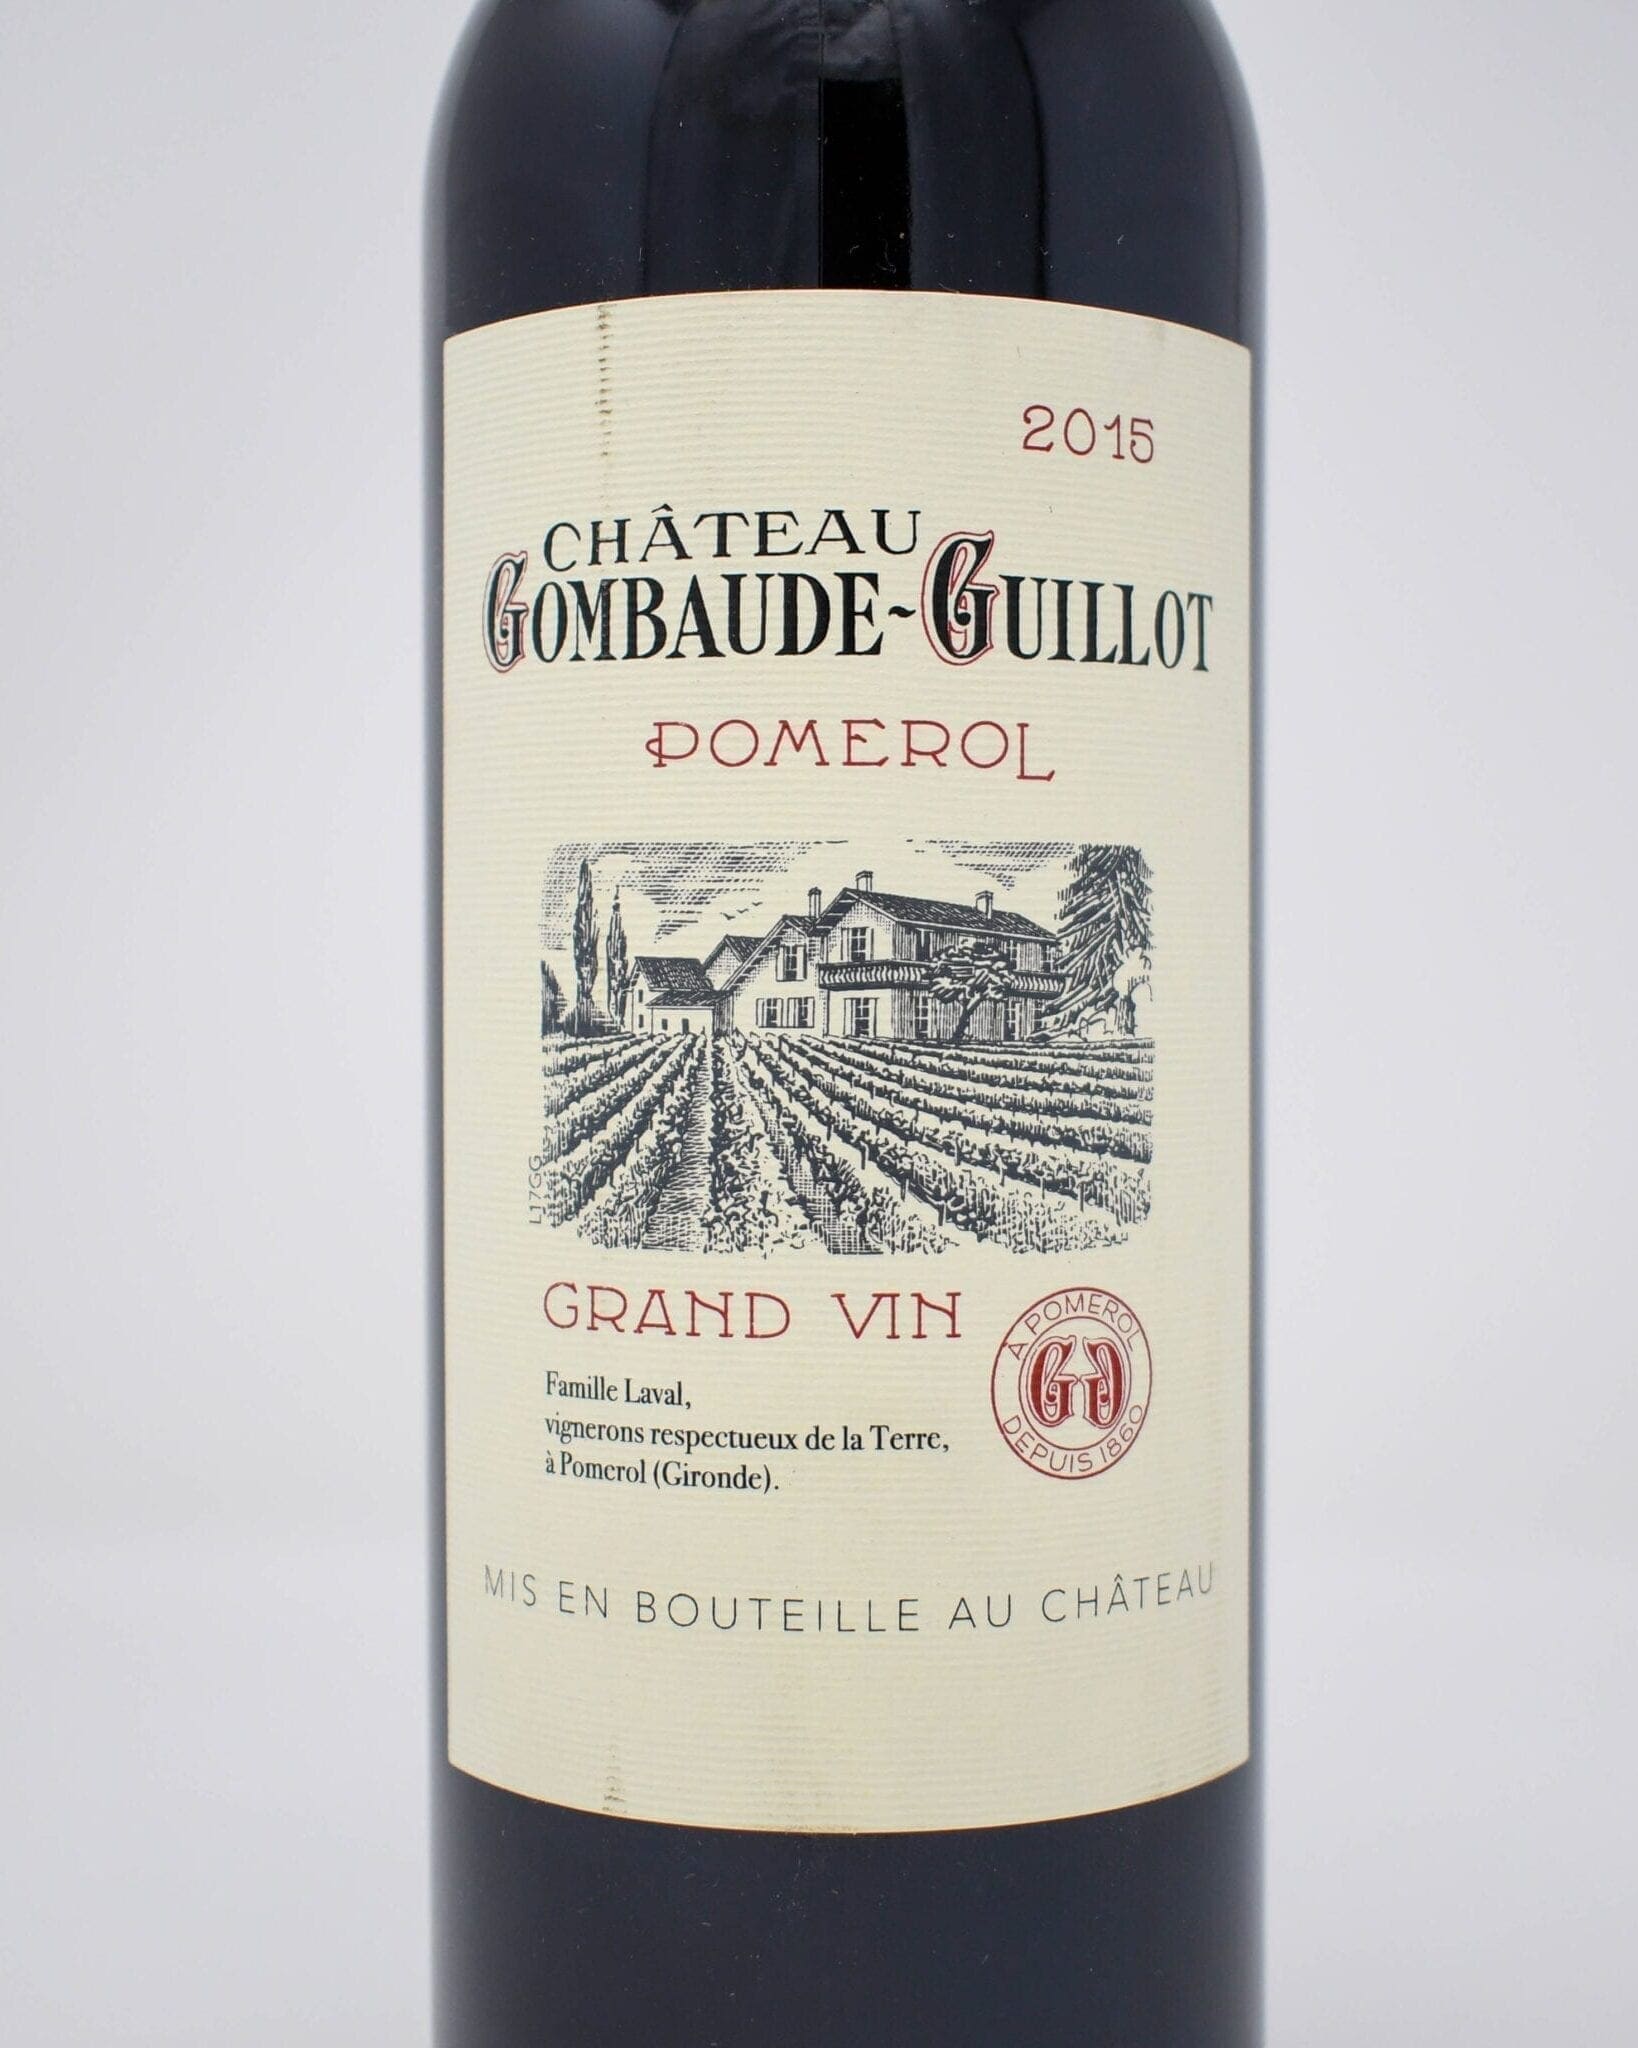 Chateau Gombaude-Guillot, Pomerol